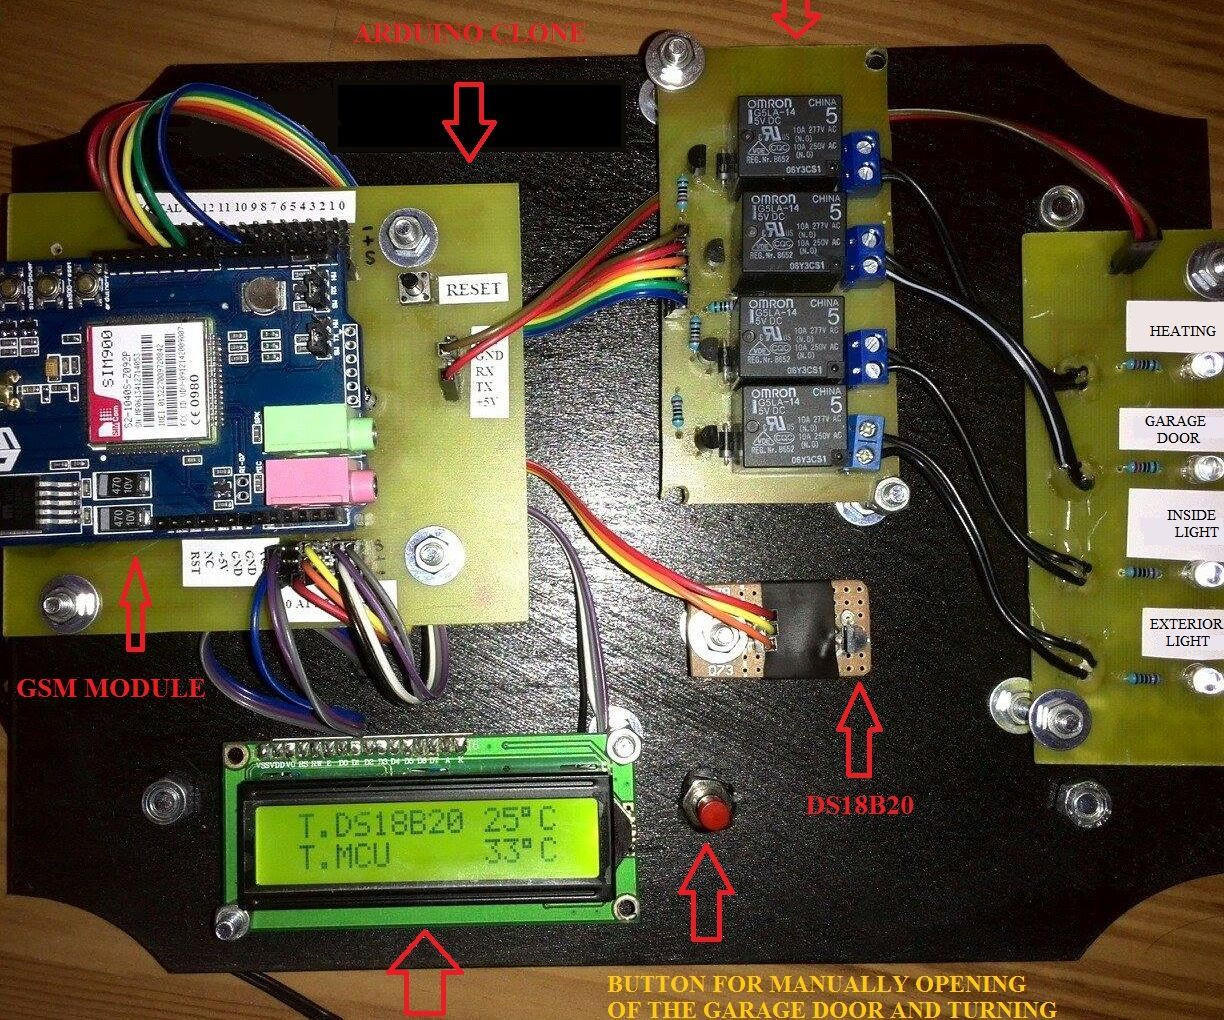 DIY Home Automation System
 Home automation system using Arduino and SIM900 GSM module